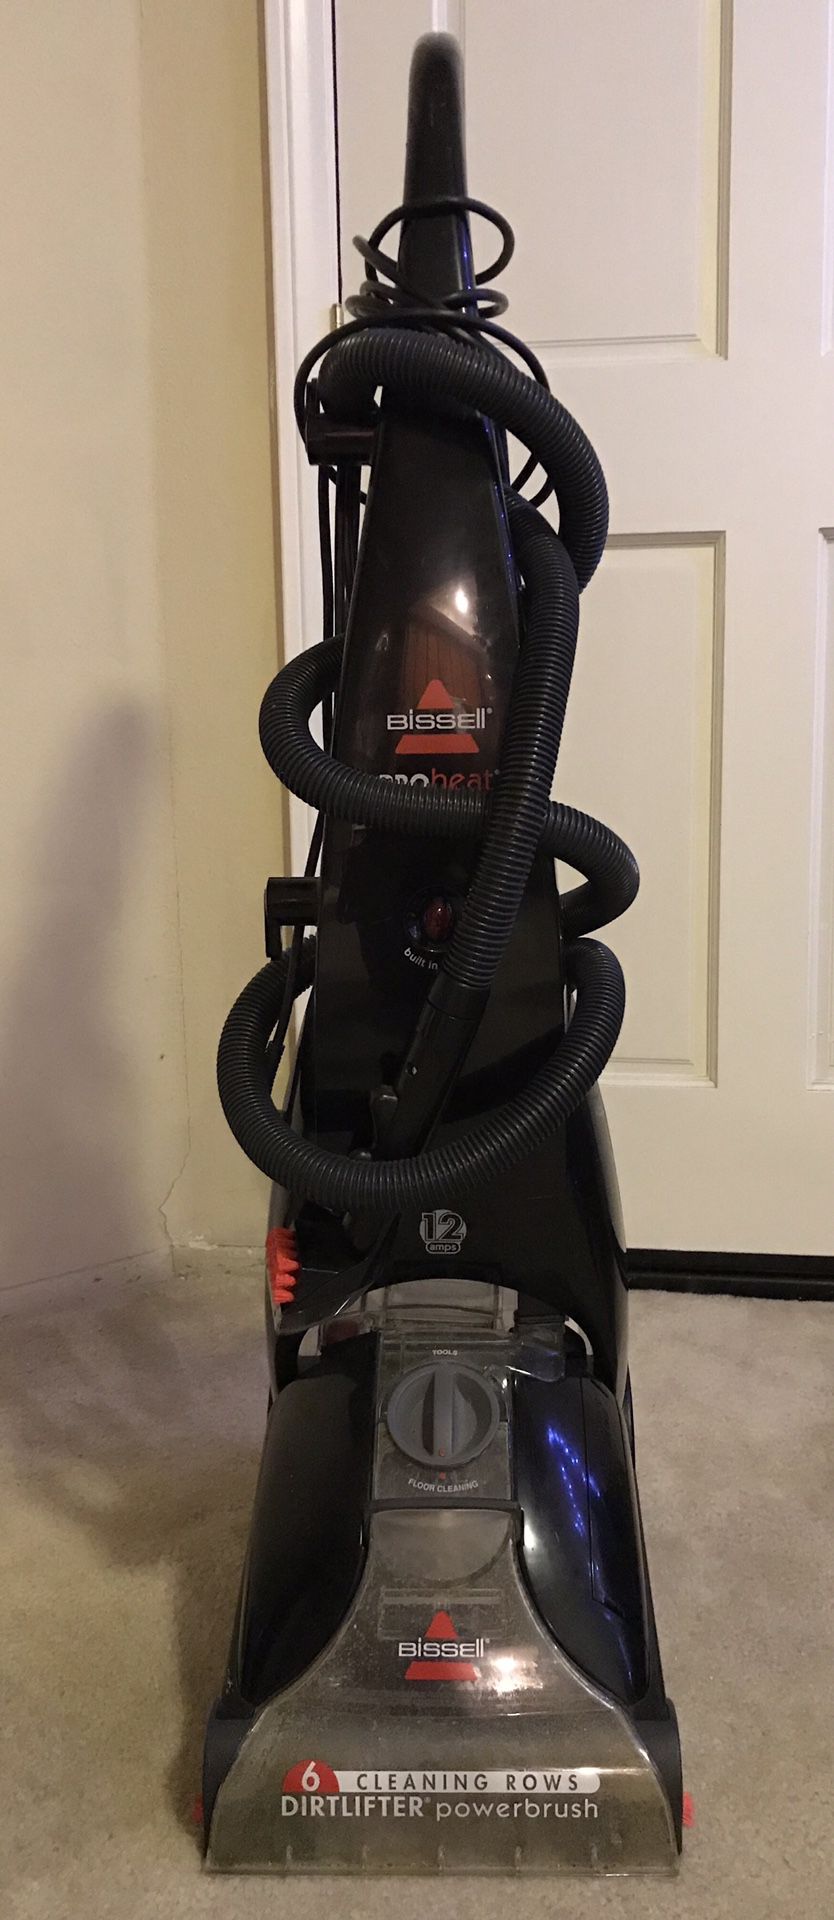 Bissell proheat upright carpet cleaner